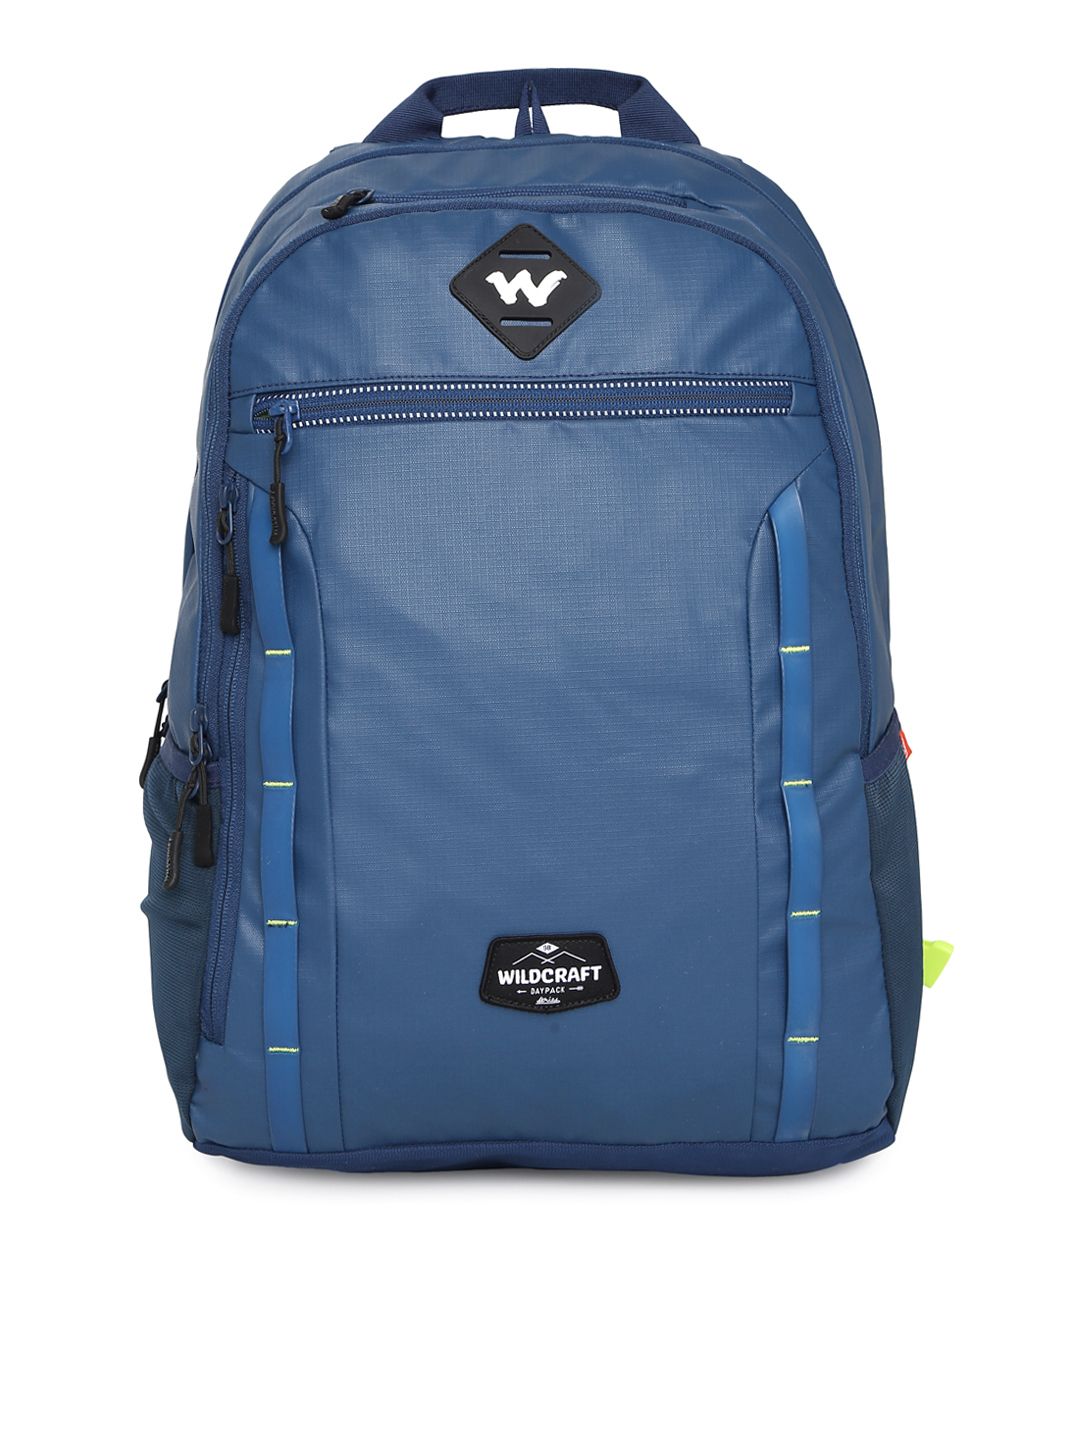 Wildcraft Unisex Blue Solid Xpander 2.0 Backpack Price in India